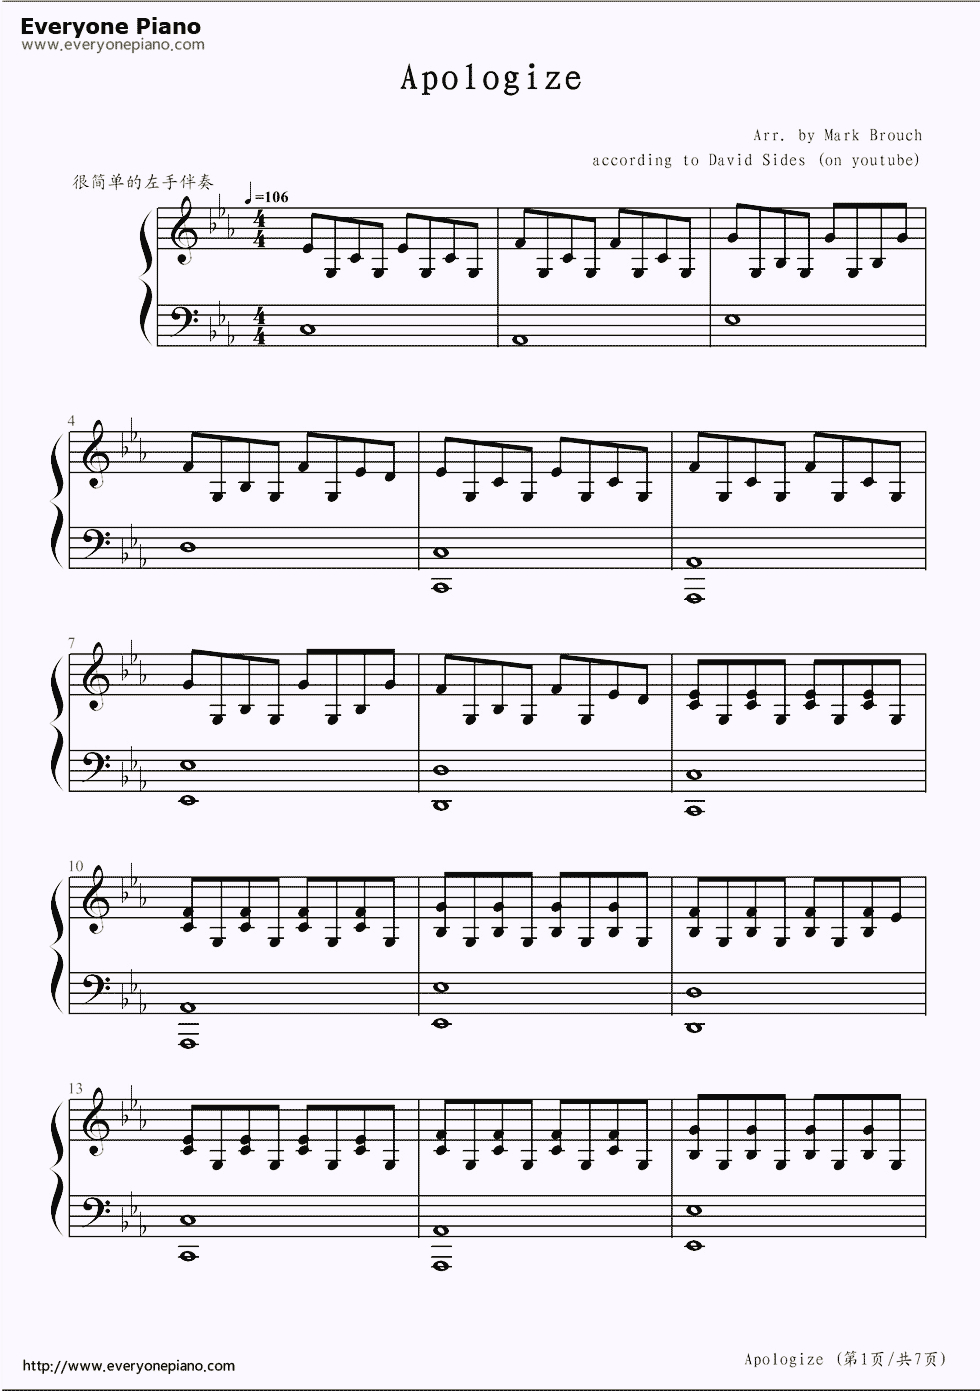 Easy Verson Of Apologizeone Republic | How To Play Piano | Piano - Apologize Piano Sheet Music Free Printable